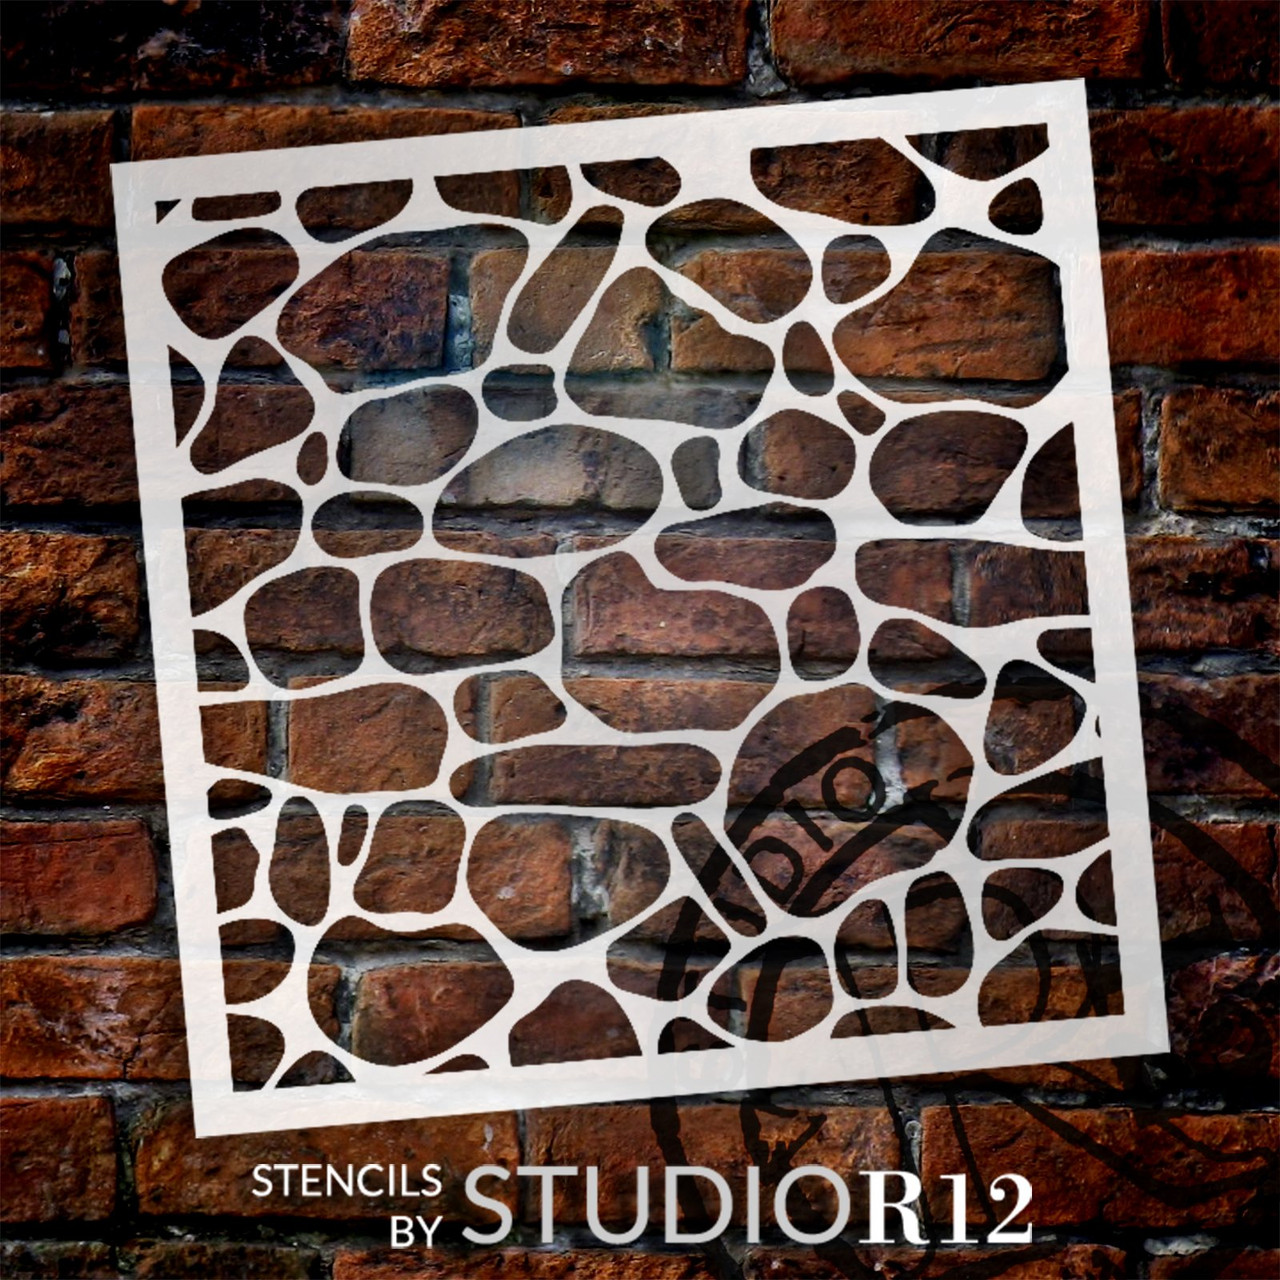 River Rock - Repeatable Pattern Stencil by StudioR12 - Select Size - USA Made - DIY Background for Crafting & Painting | Reusable Mixed Media Template